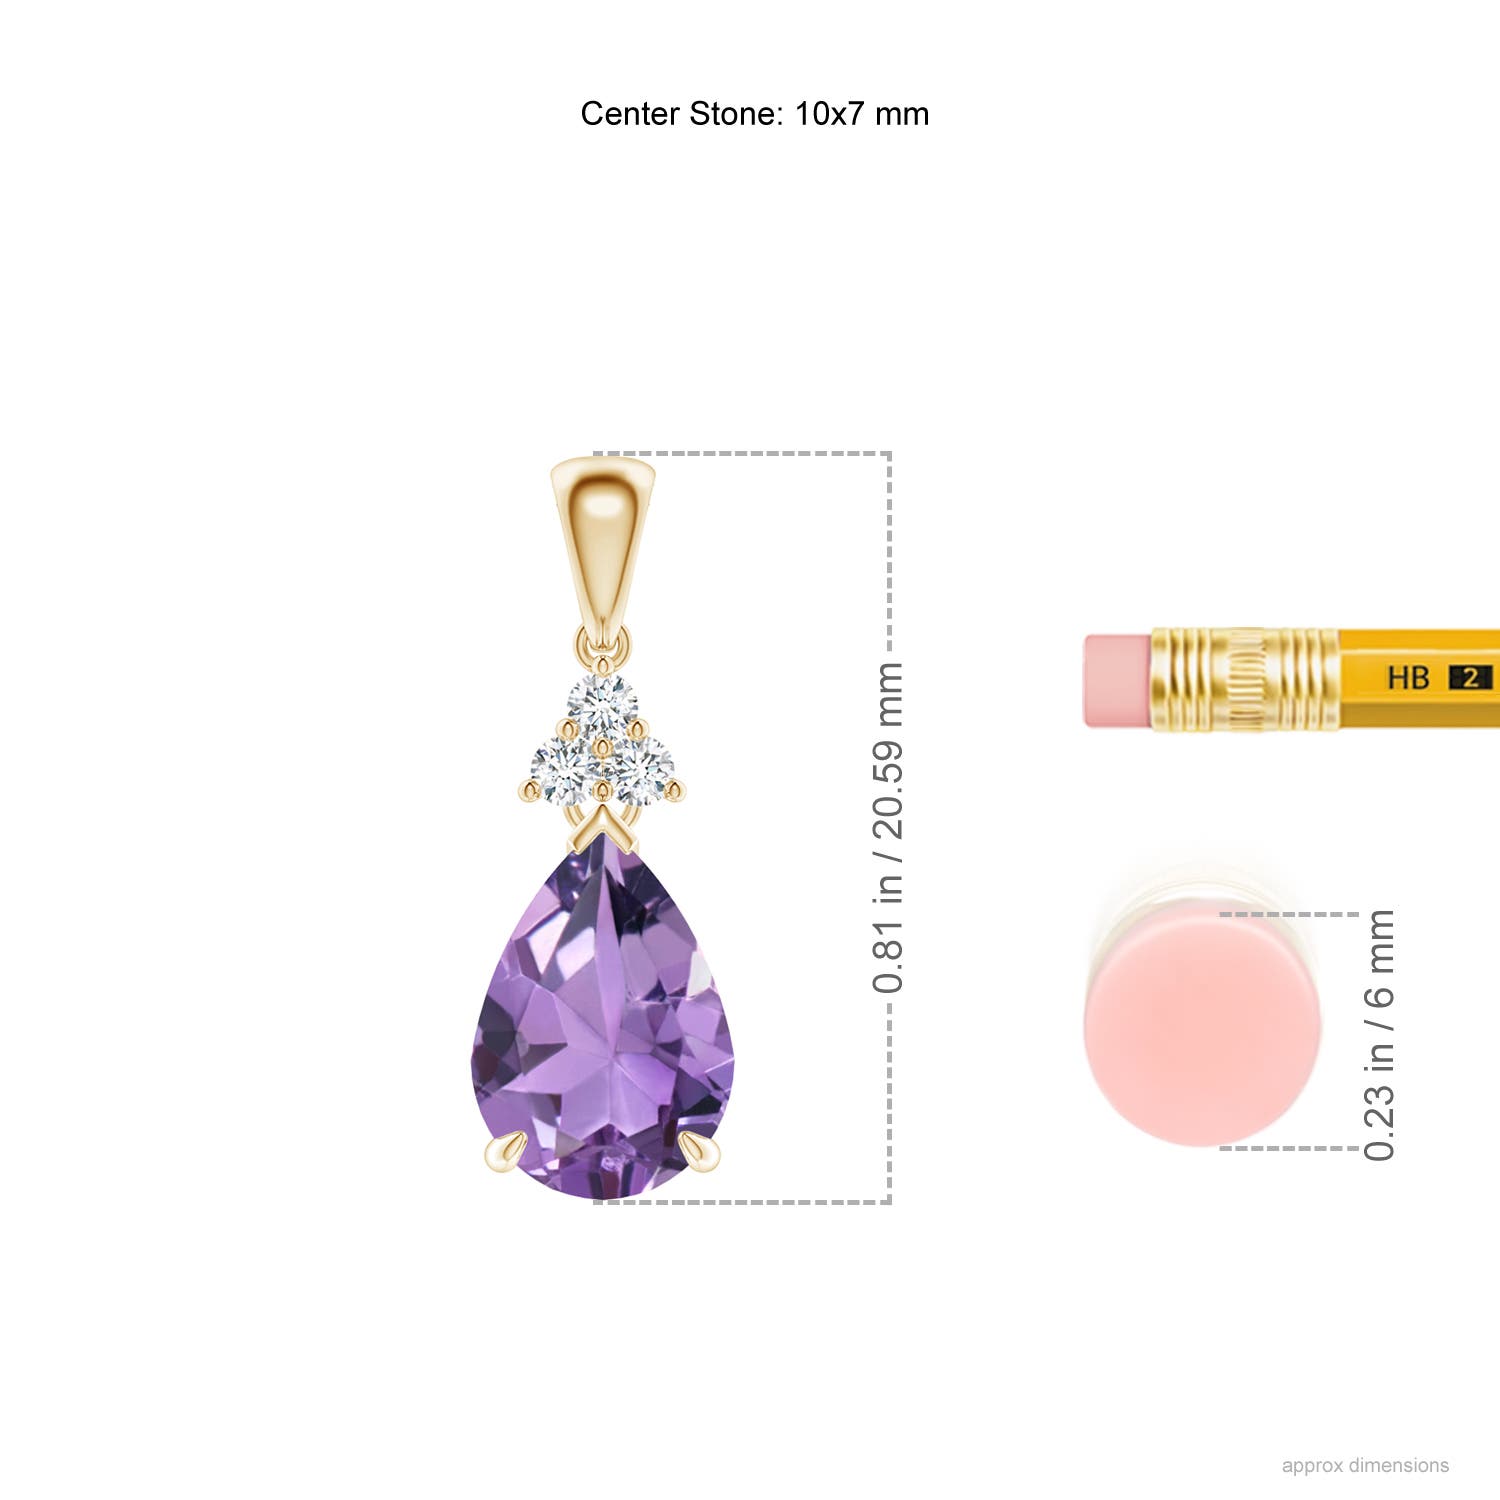 A - Amethyst / 1.69 CT / 14 KT Yellow Gold